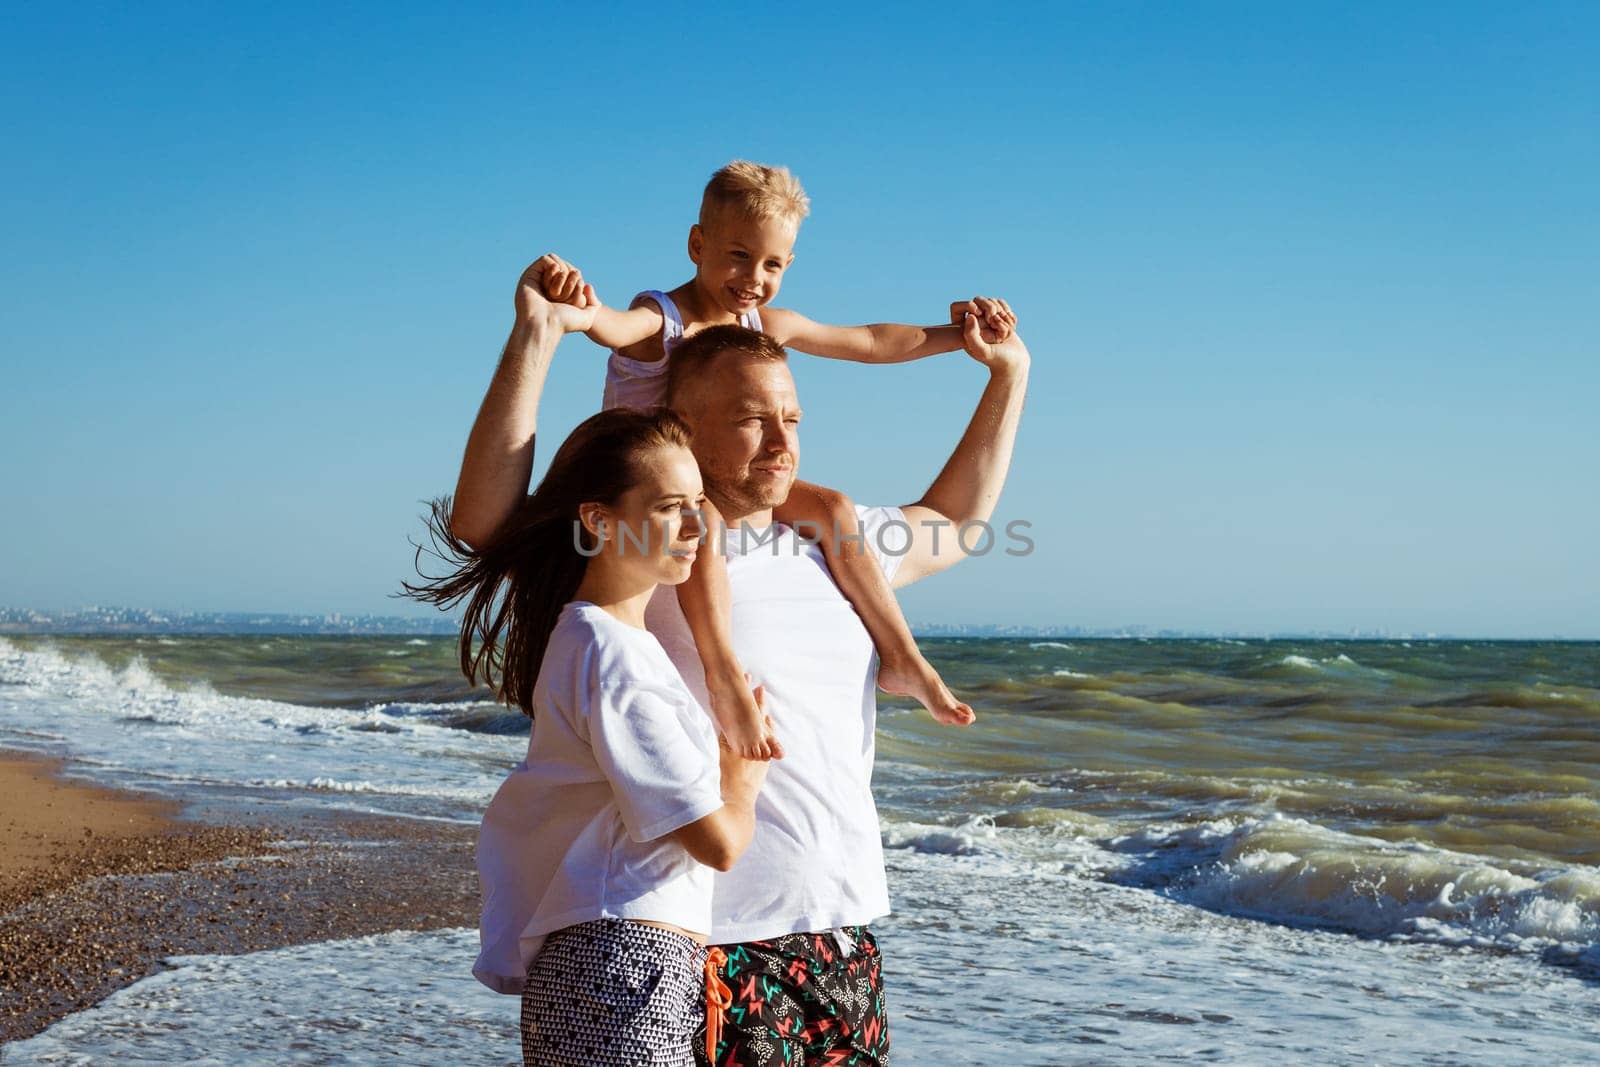 joyful family on the beach People having fun view summertime vacation. Father mother and child against blue sea and sky background. vacation travel concept